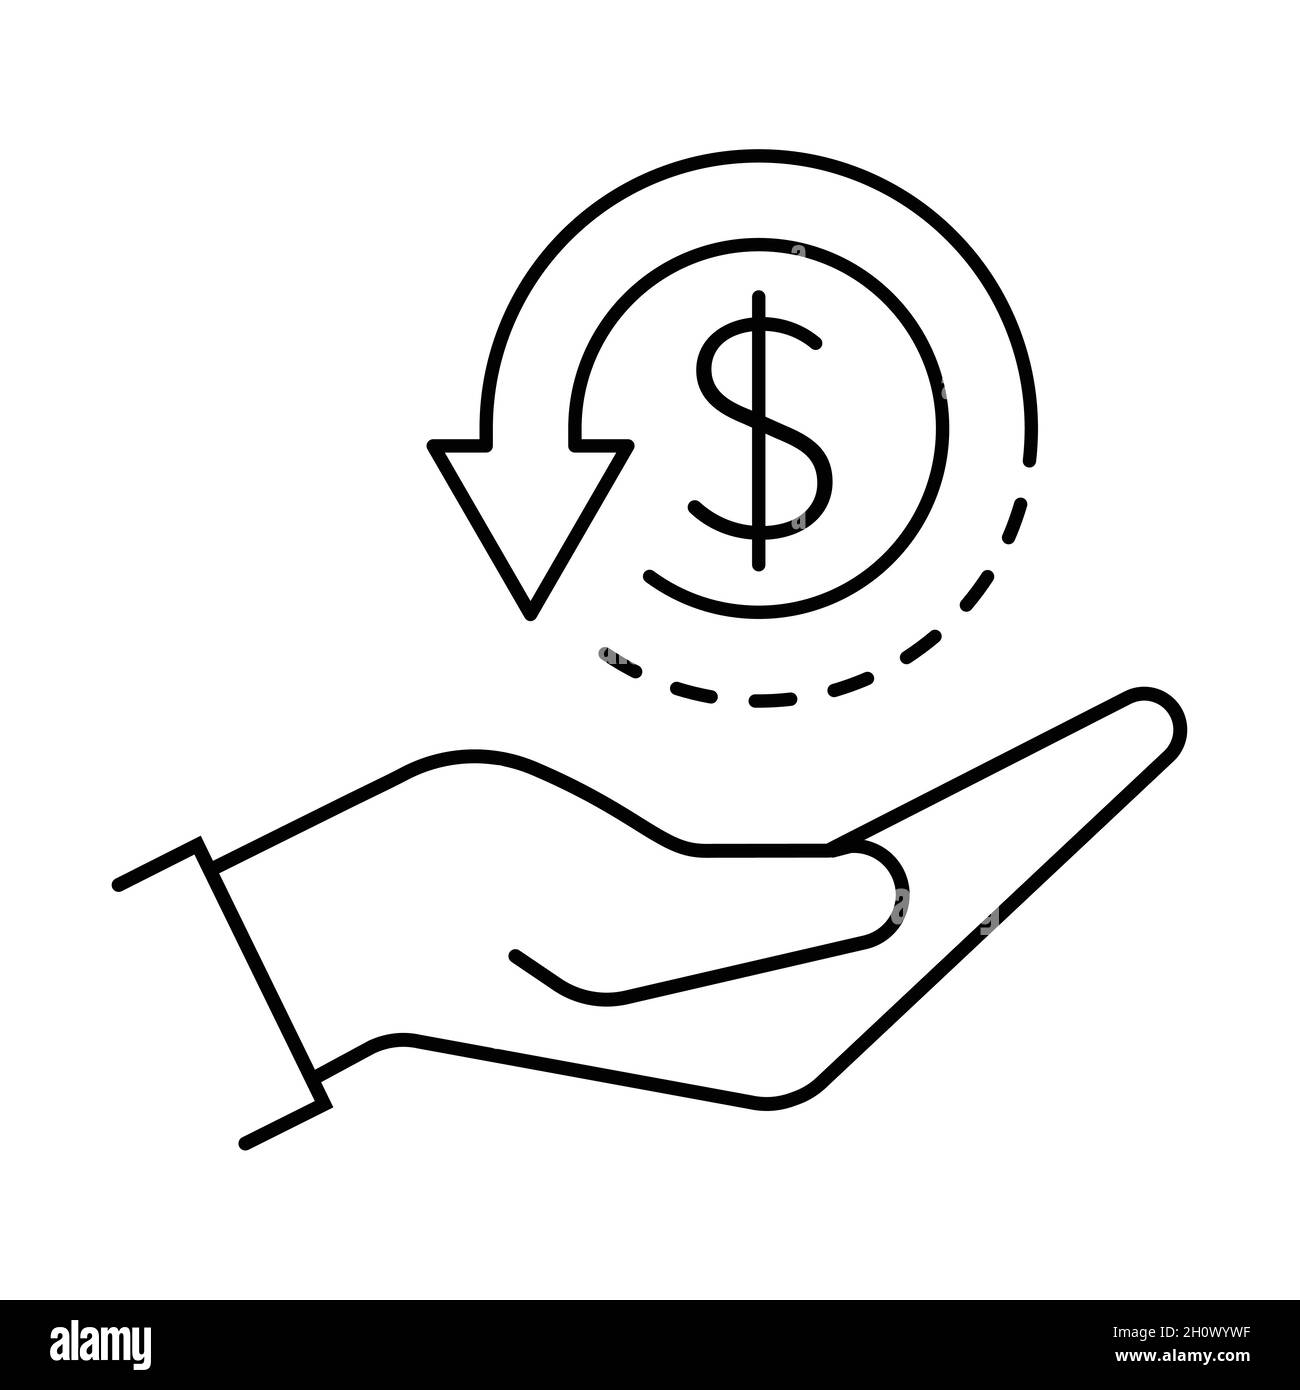 cashback-icon-vector-return-money-cash-back-rebate-hand-and-coin-sign